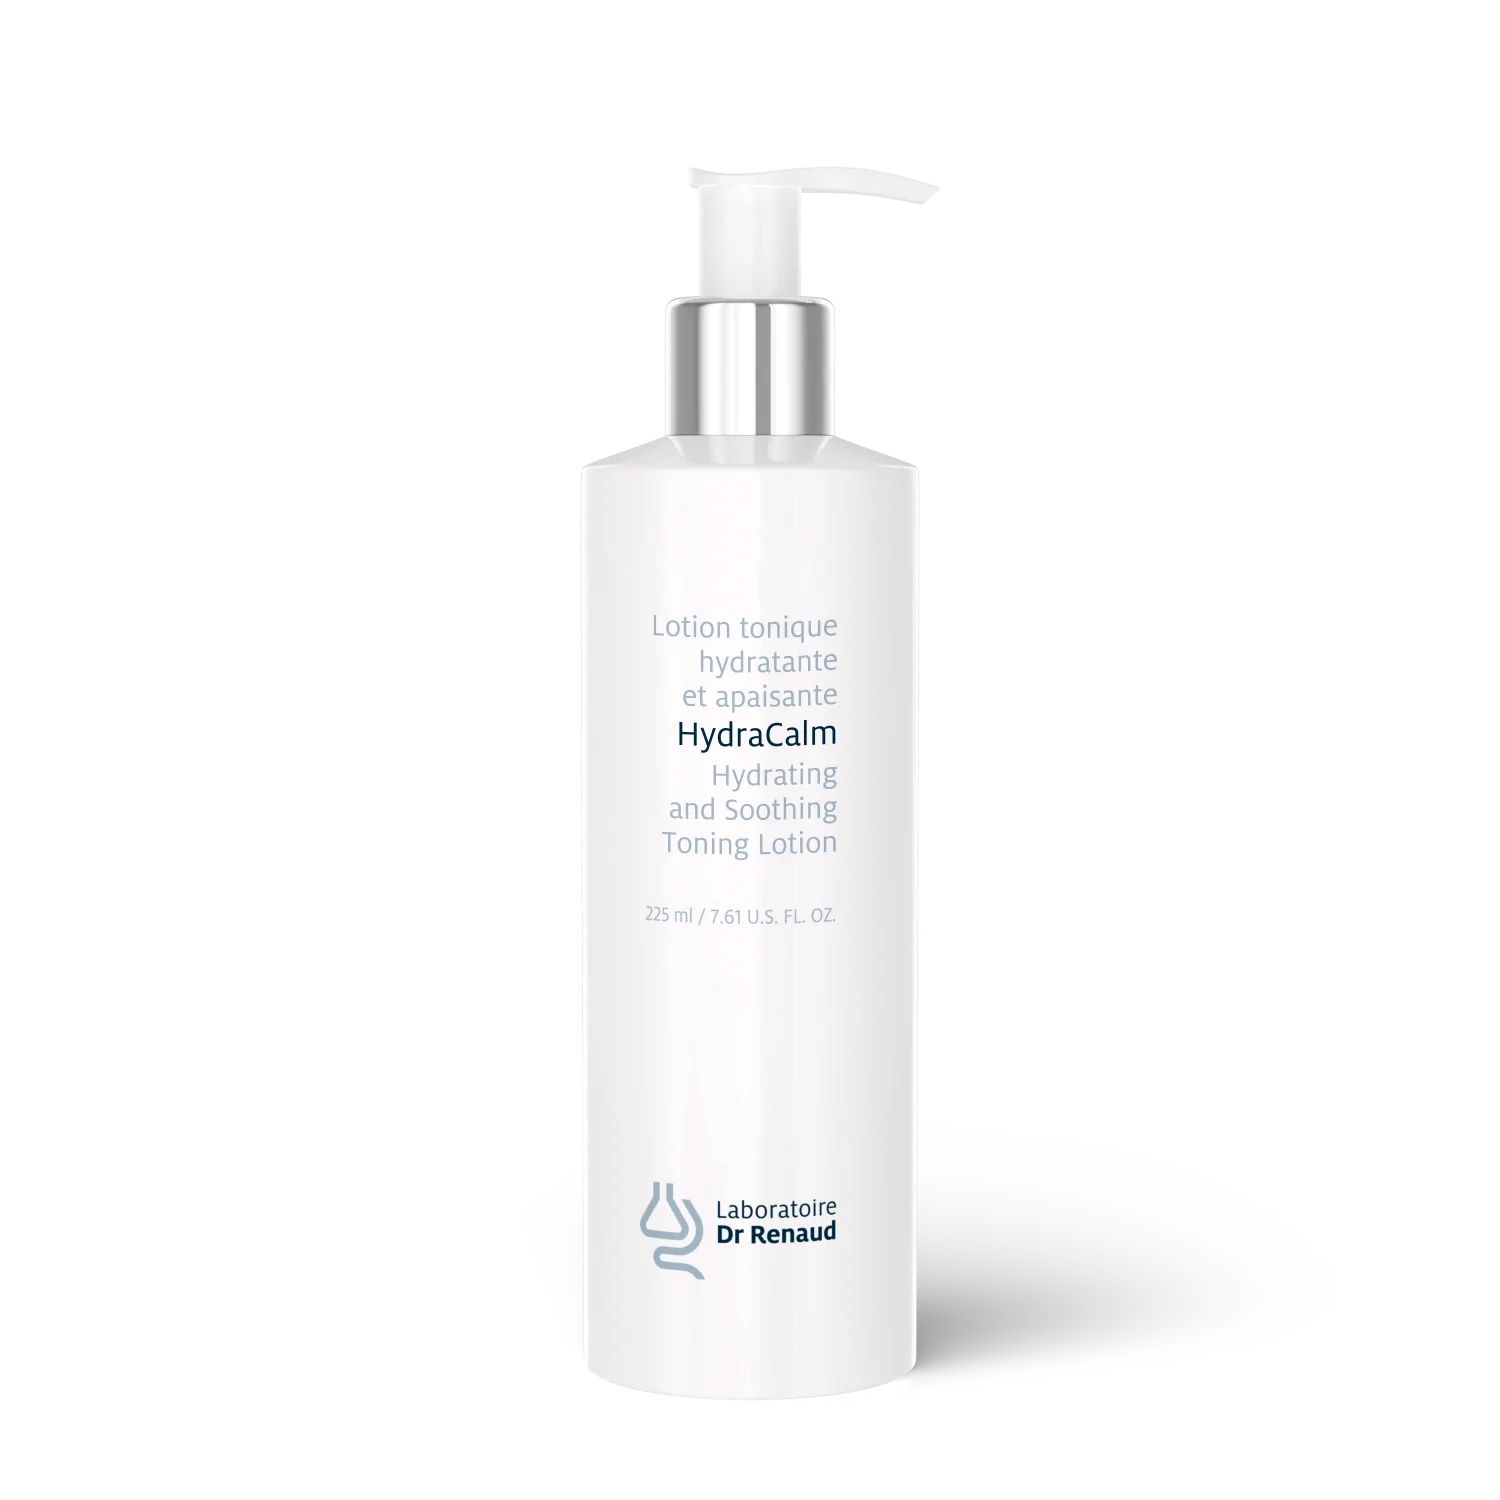 hydracalm toning lotion